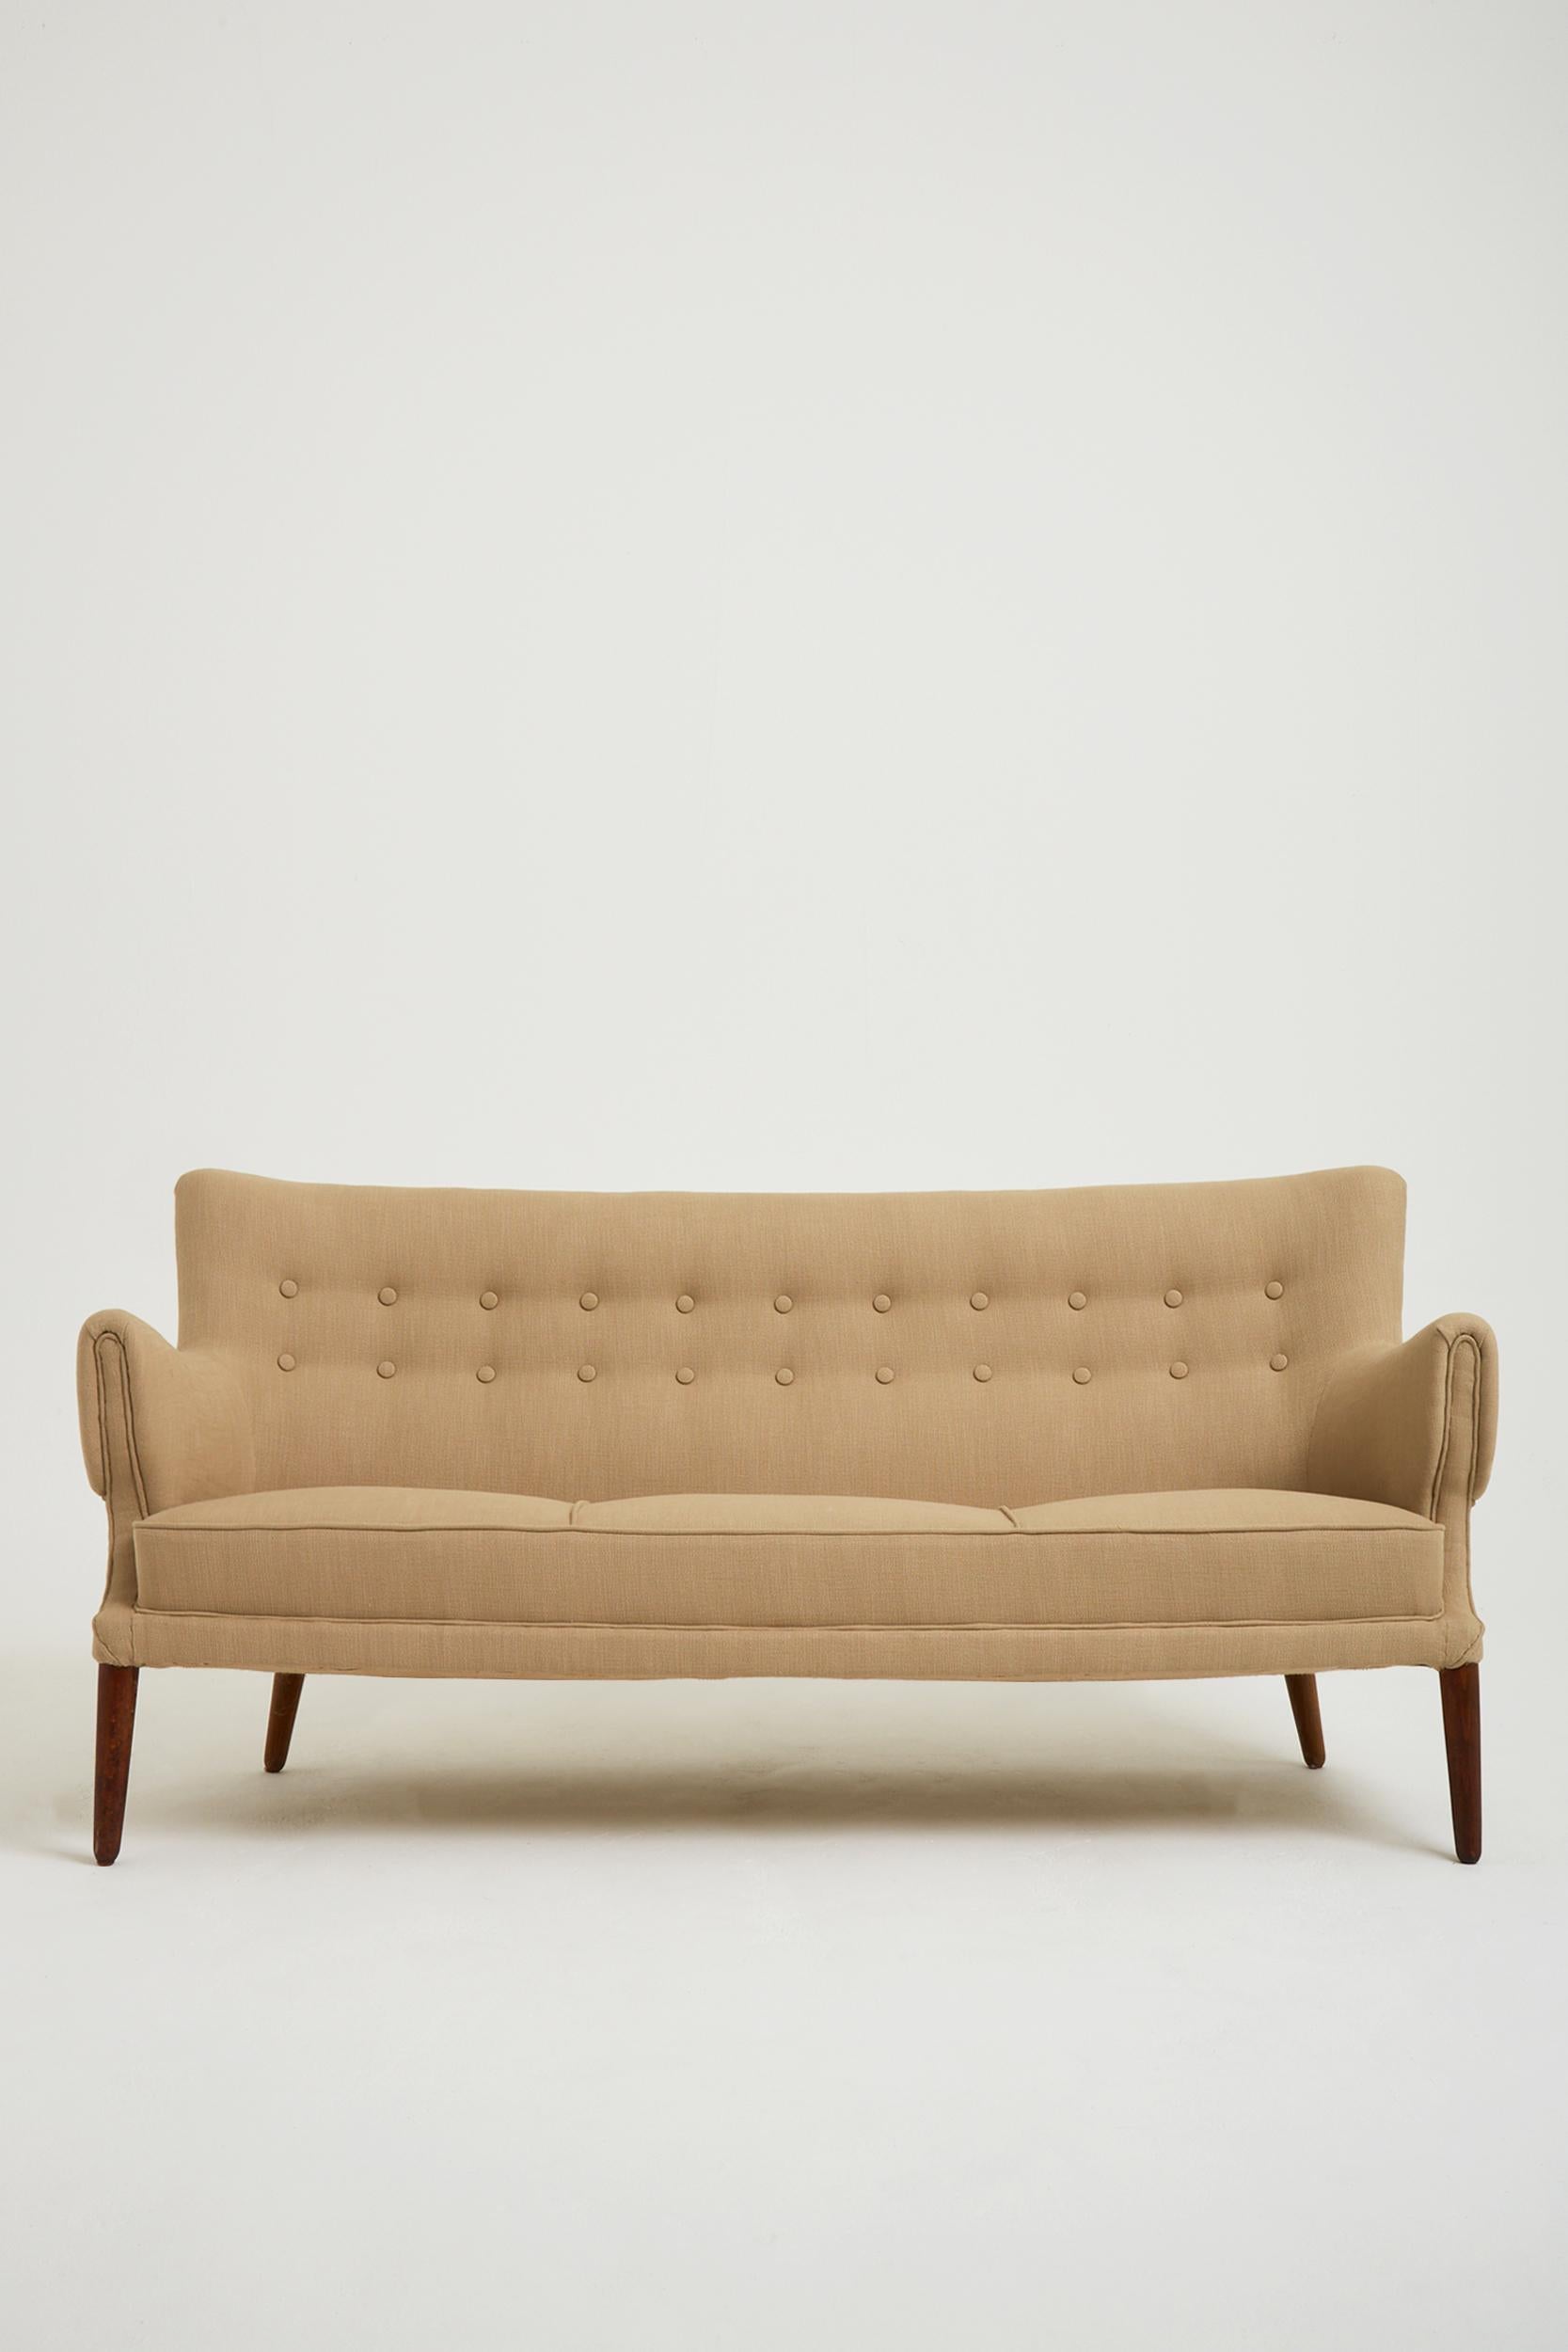 A Mid-Century buttoned sofa.
Sweden, Circa 1940.
Reupholstered in Perennials fabric.